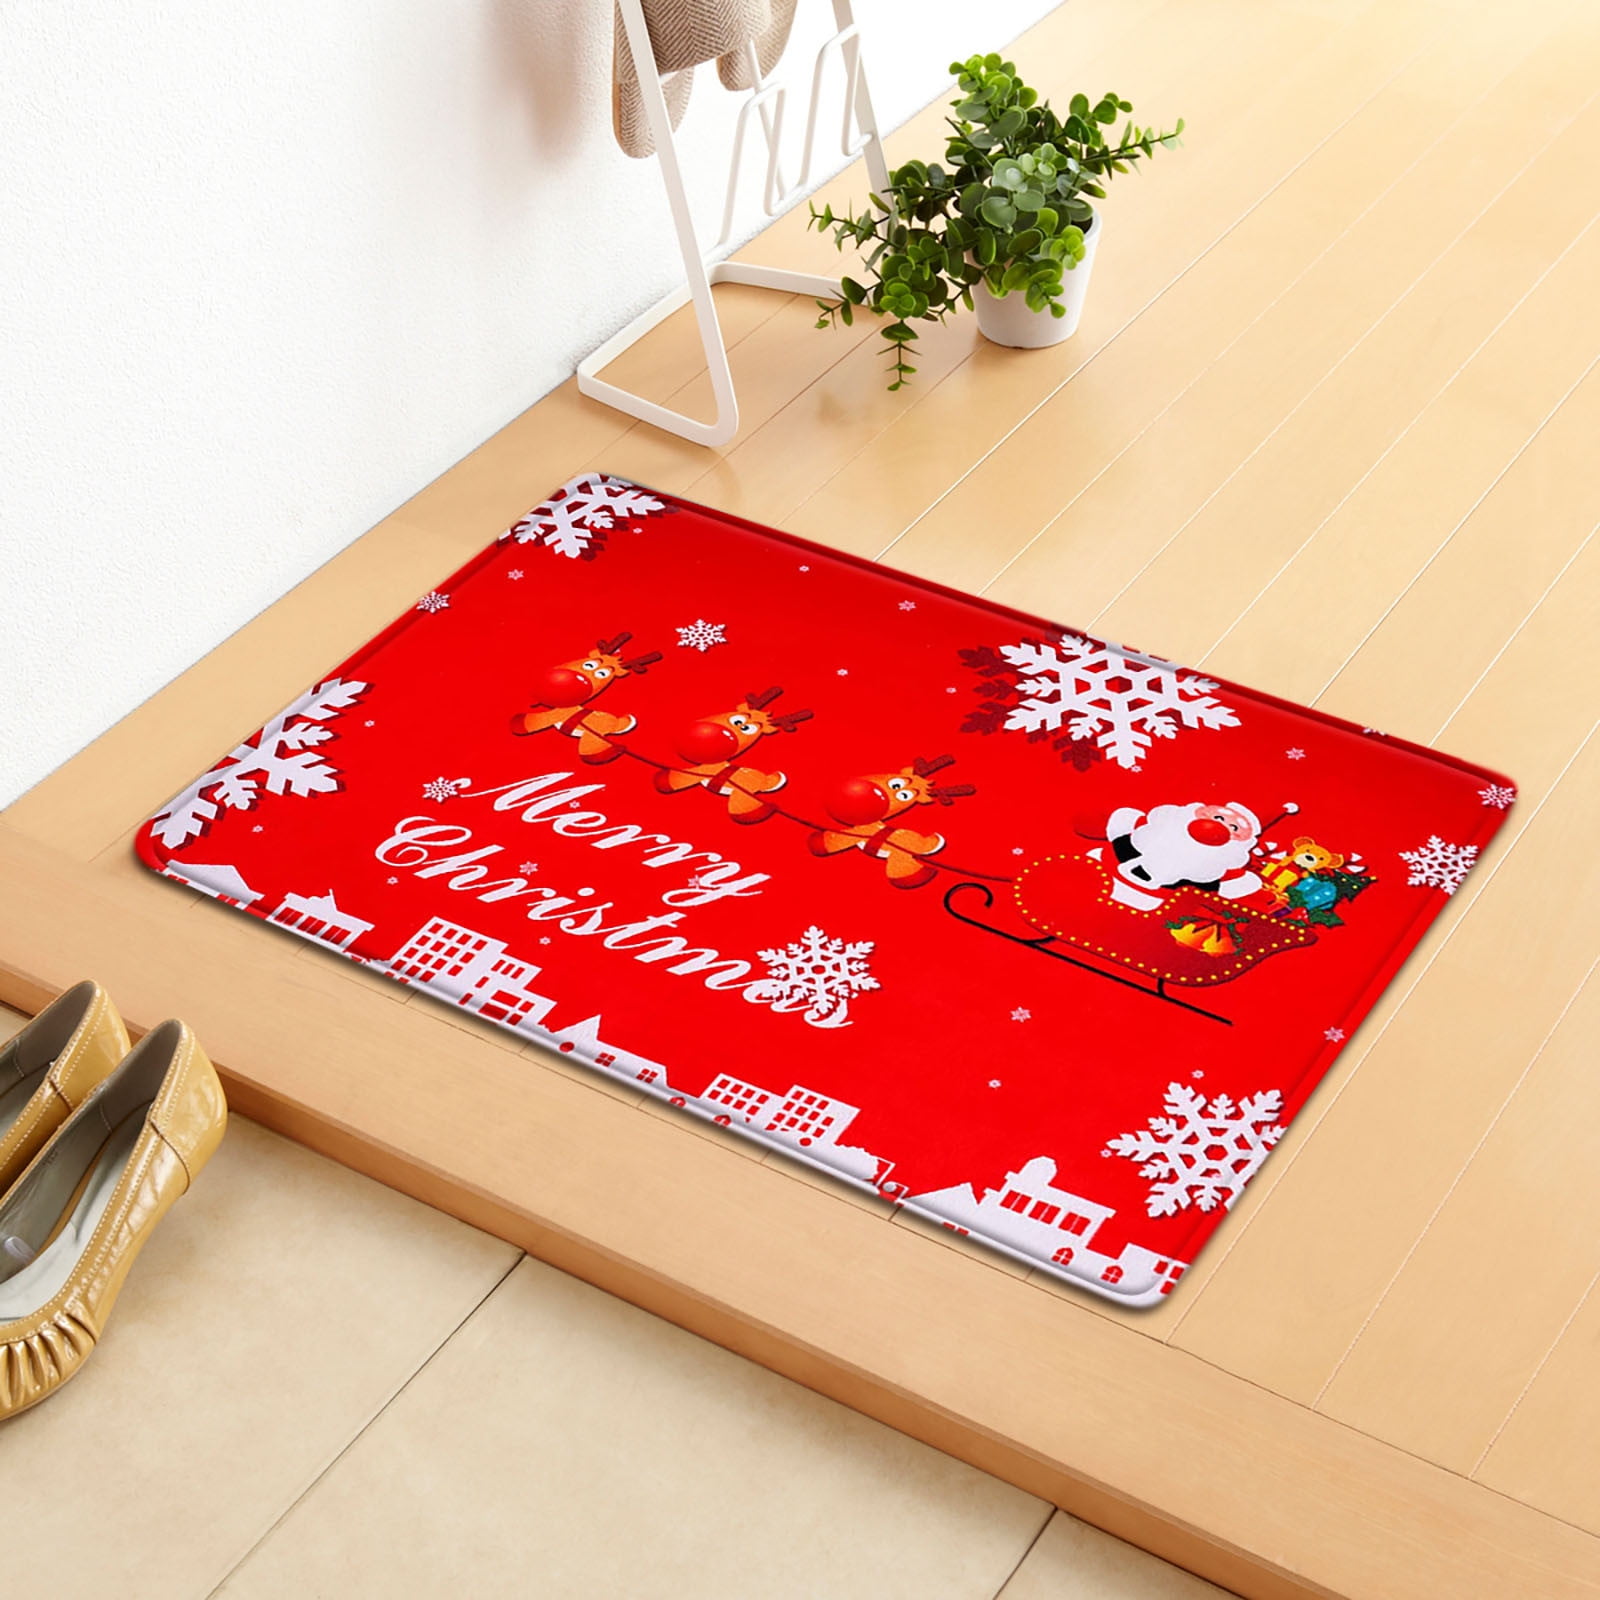 Qisiwole Non-Slip Christmas Rugs Christmas Mats 16 x 24 Inches Holiday Rugs Winter Welcome Doormats Floor Mat for Indoor Outdoor Xmas Rug Home Garden